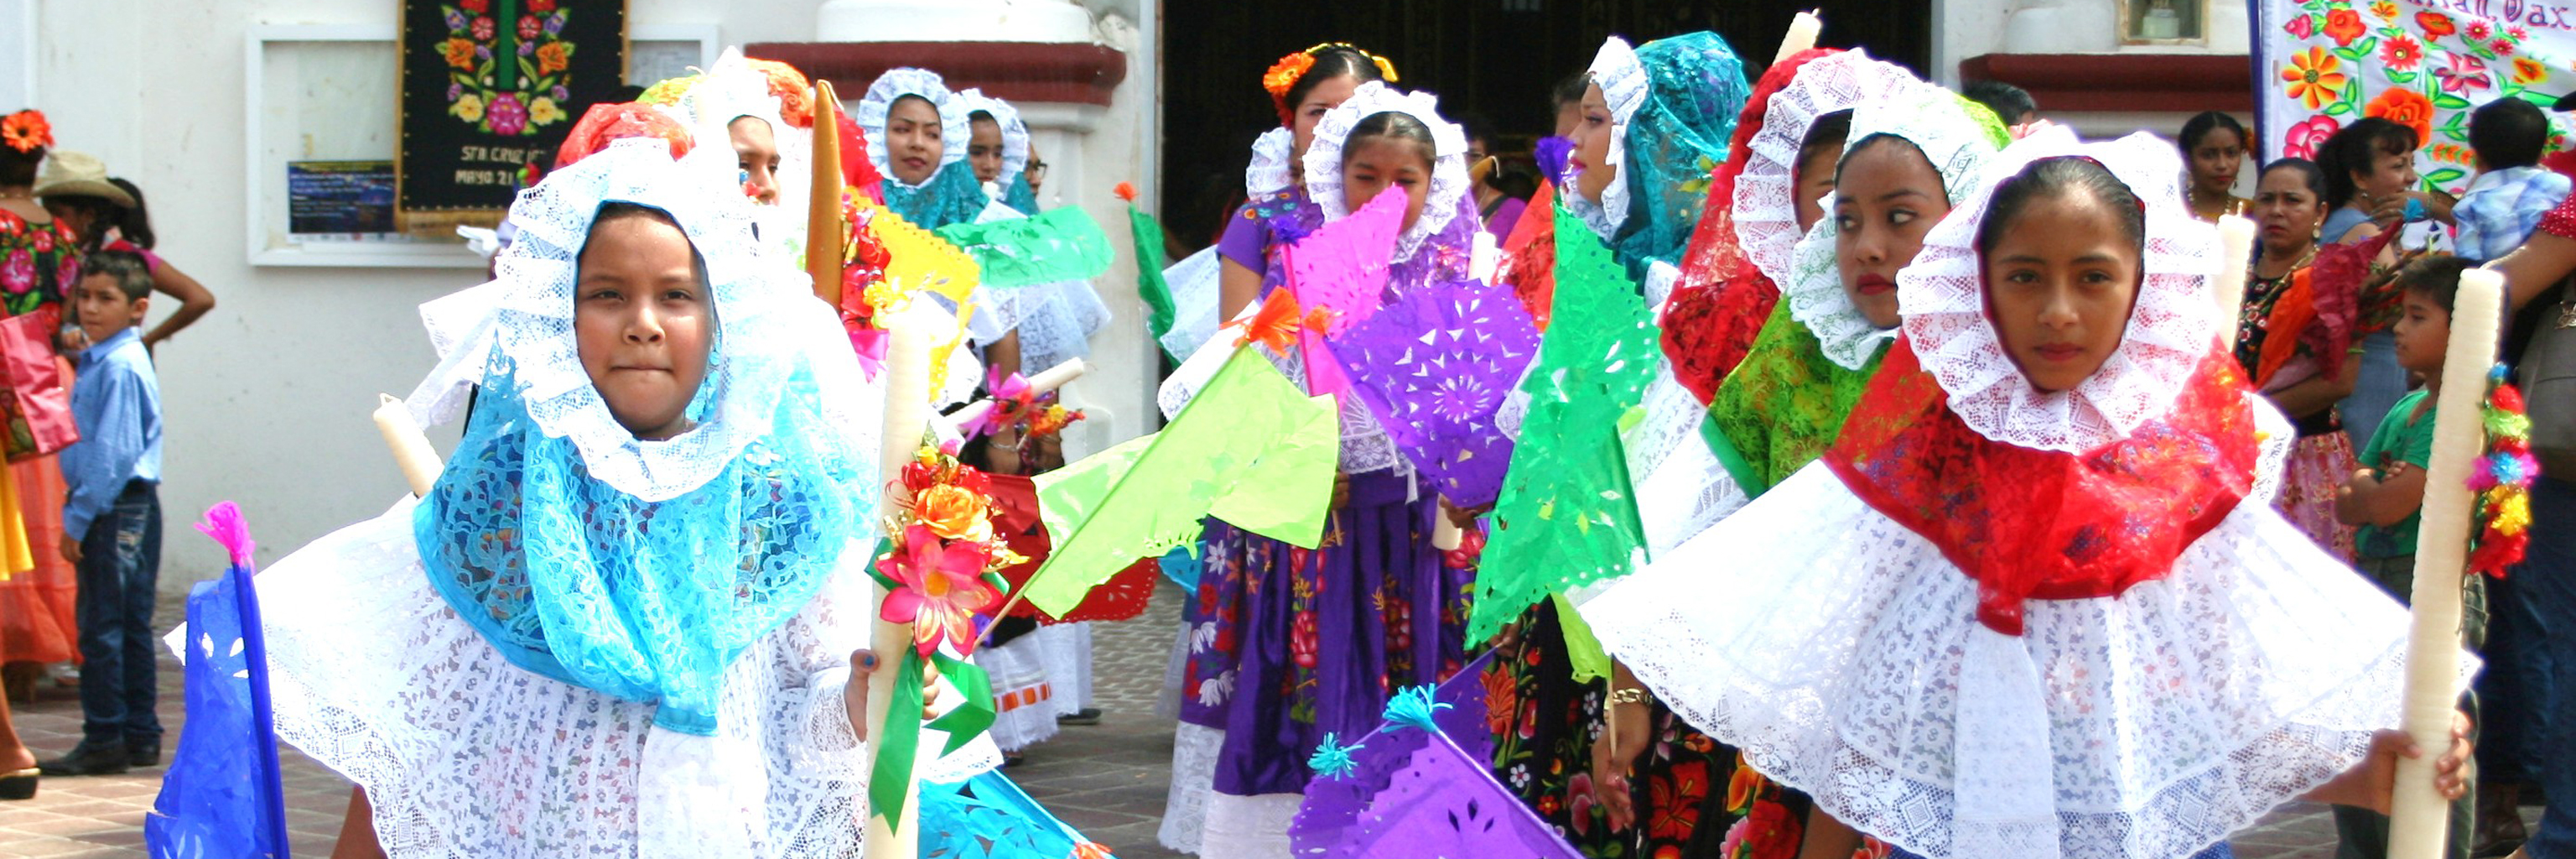 Lines of kids dressed in colorful cultural wear